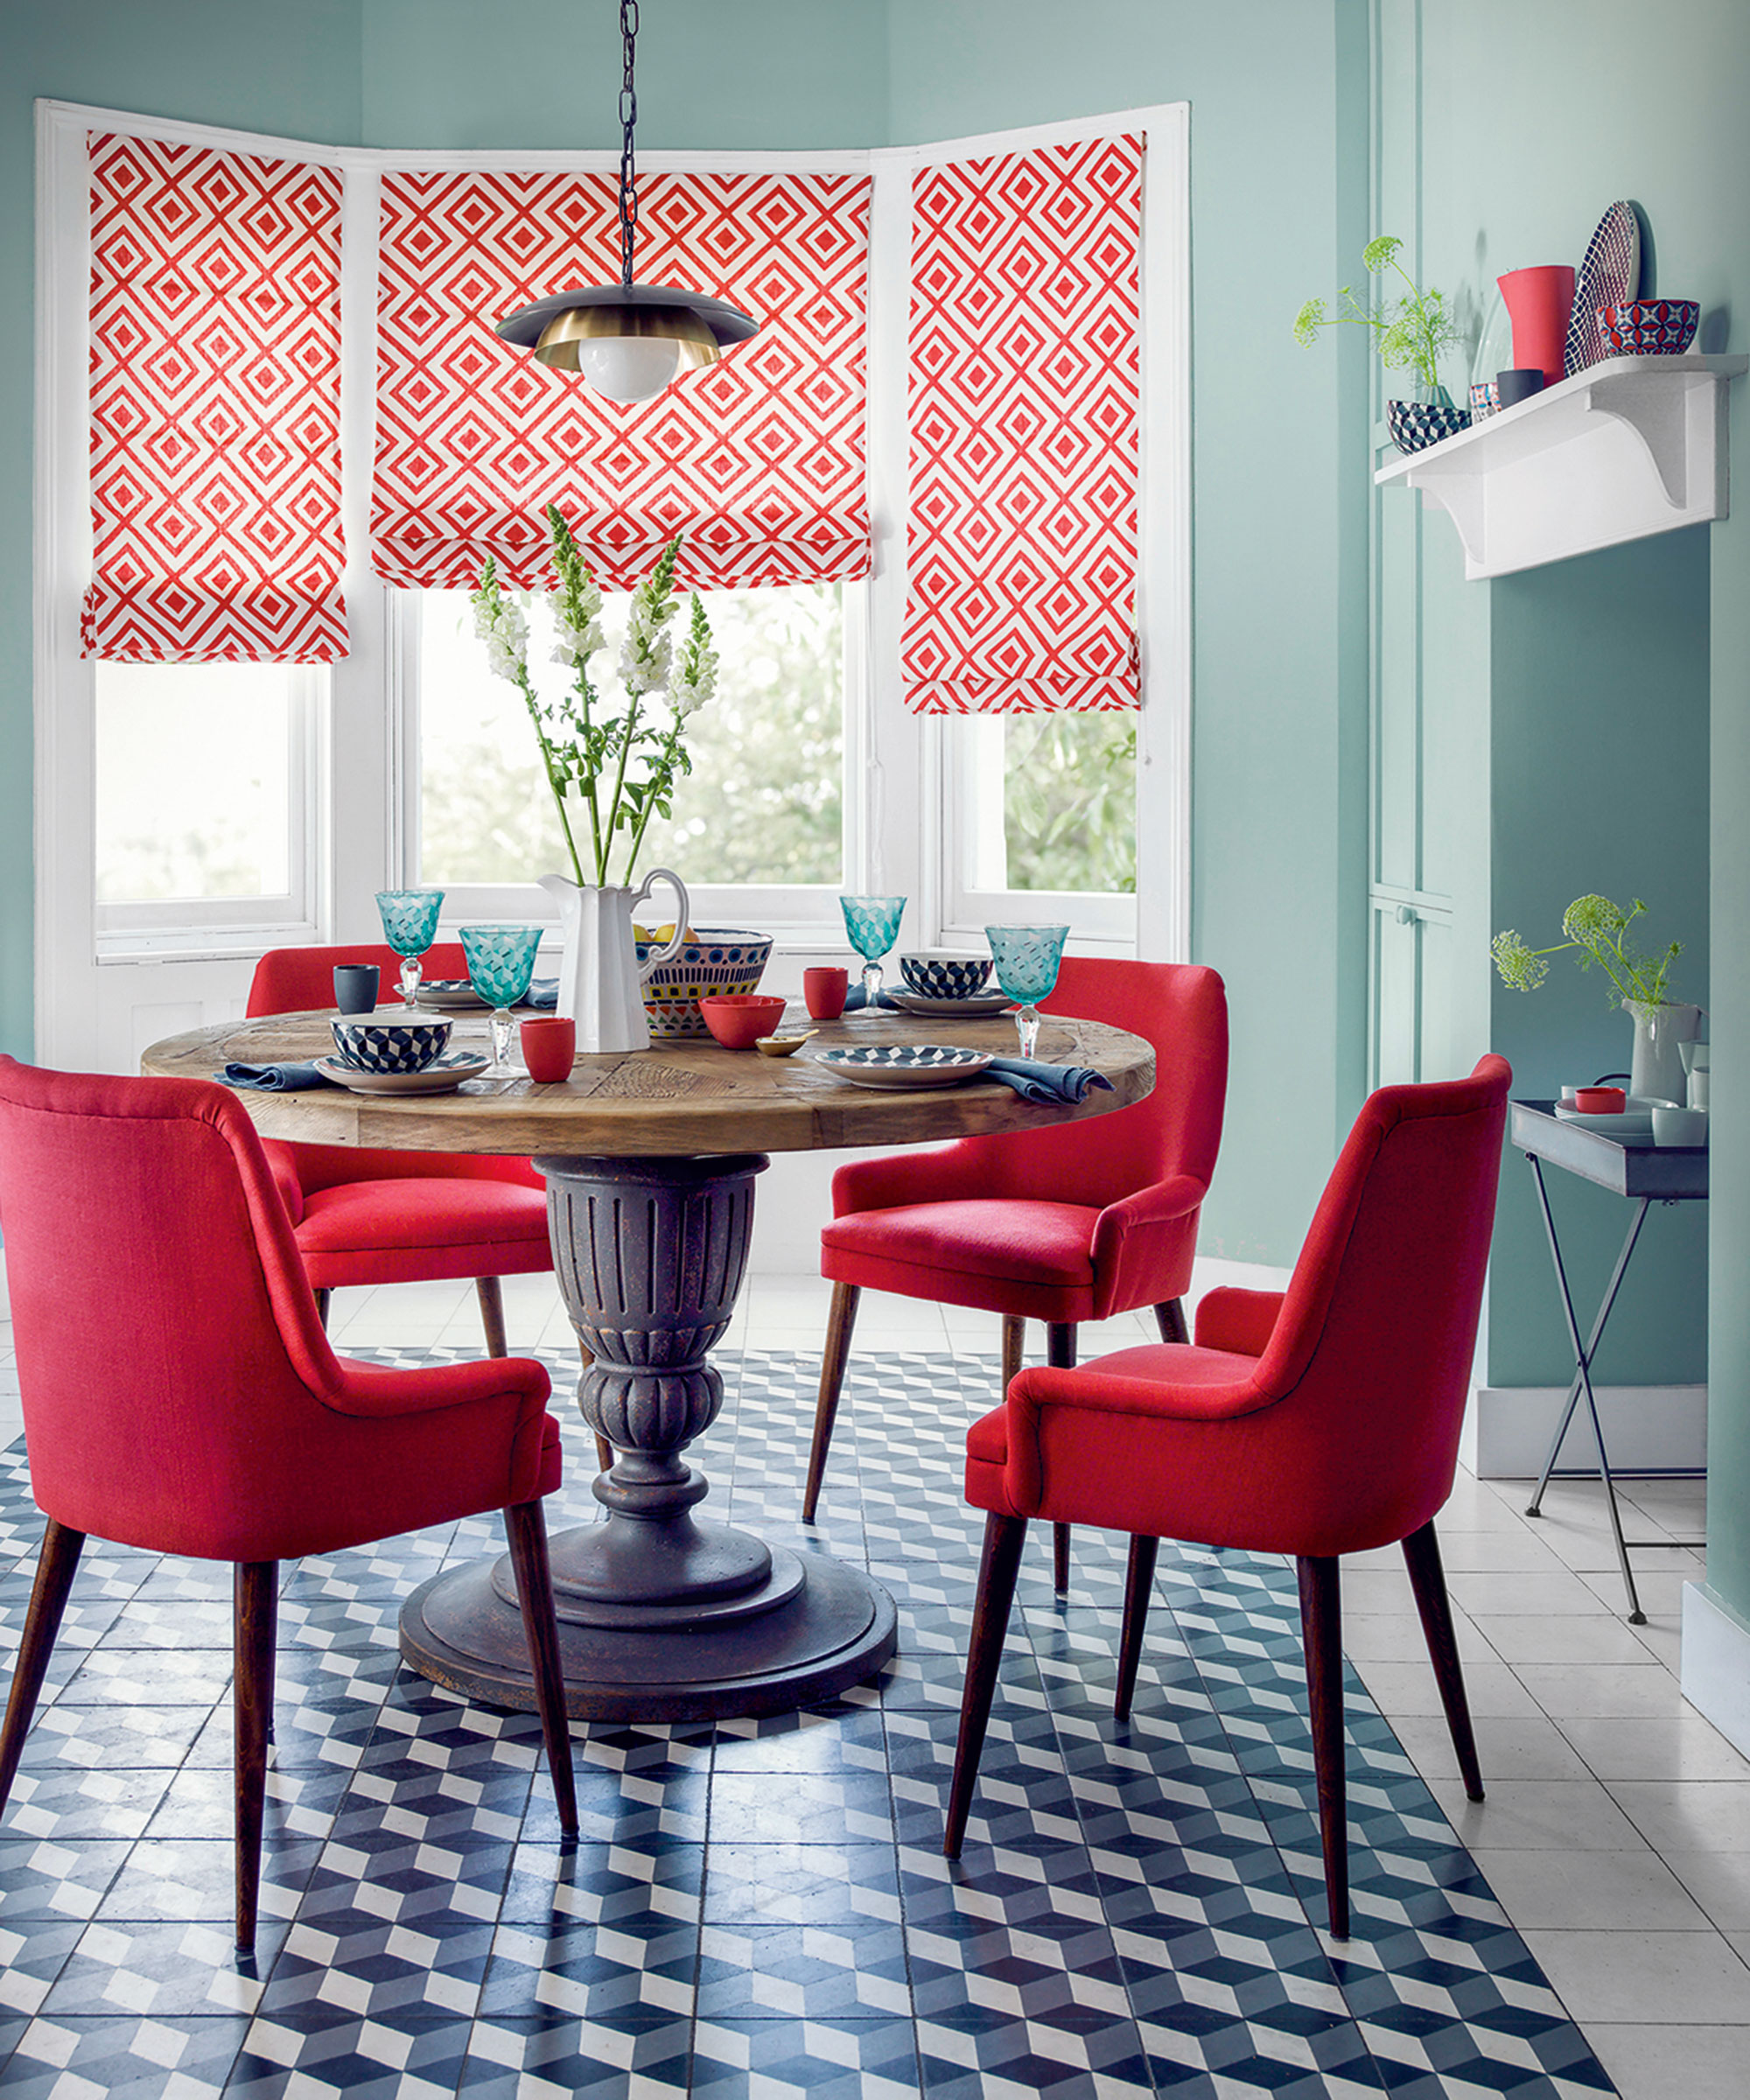 Dining room ideas with red chairs and teal walls